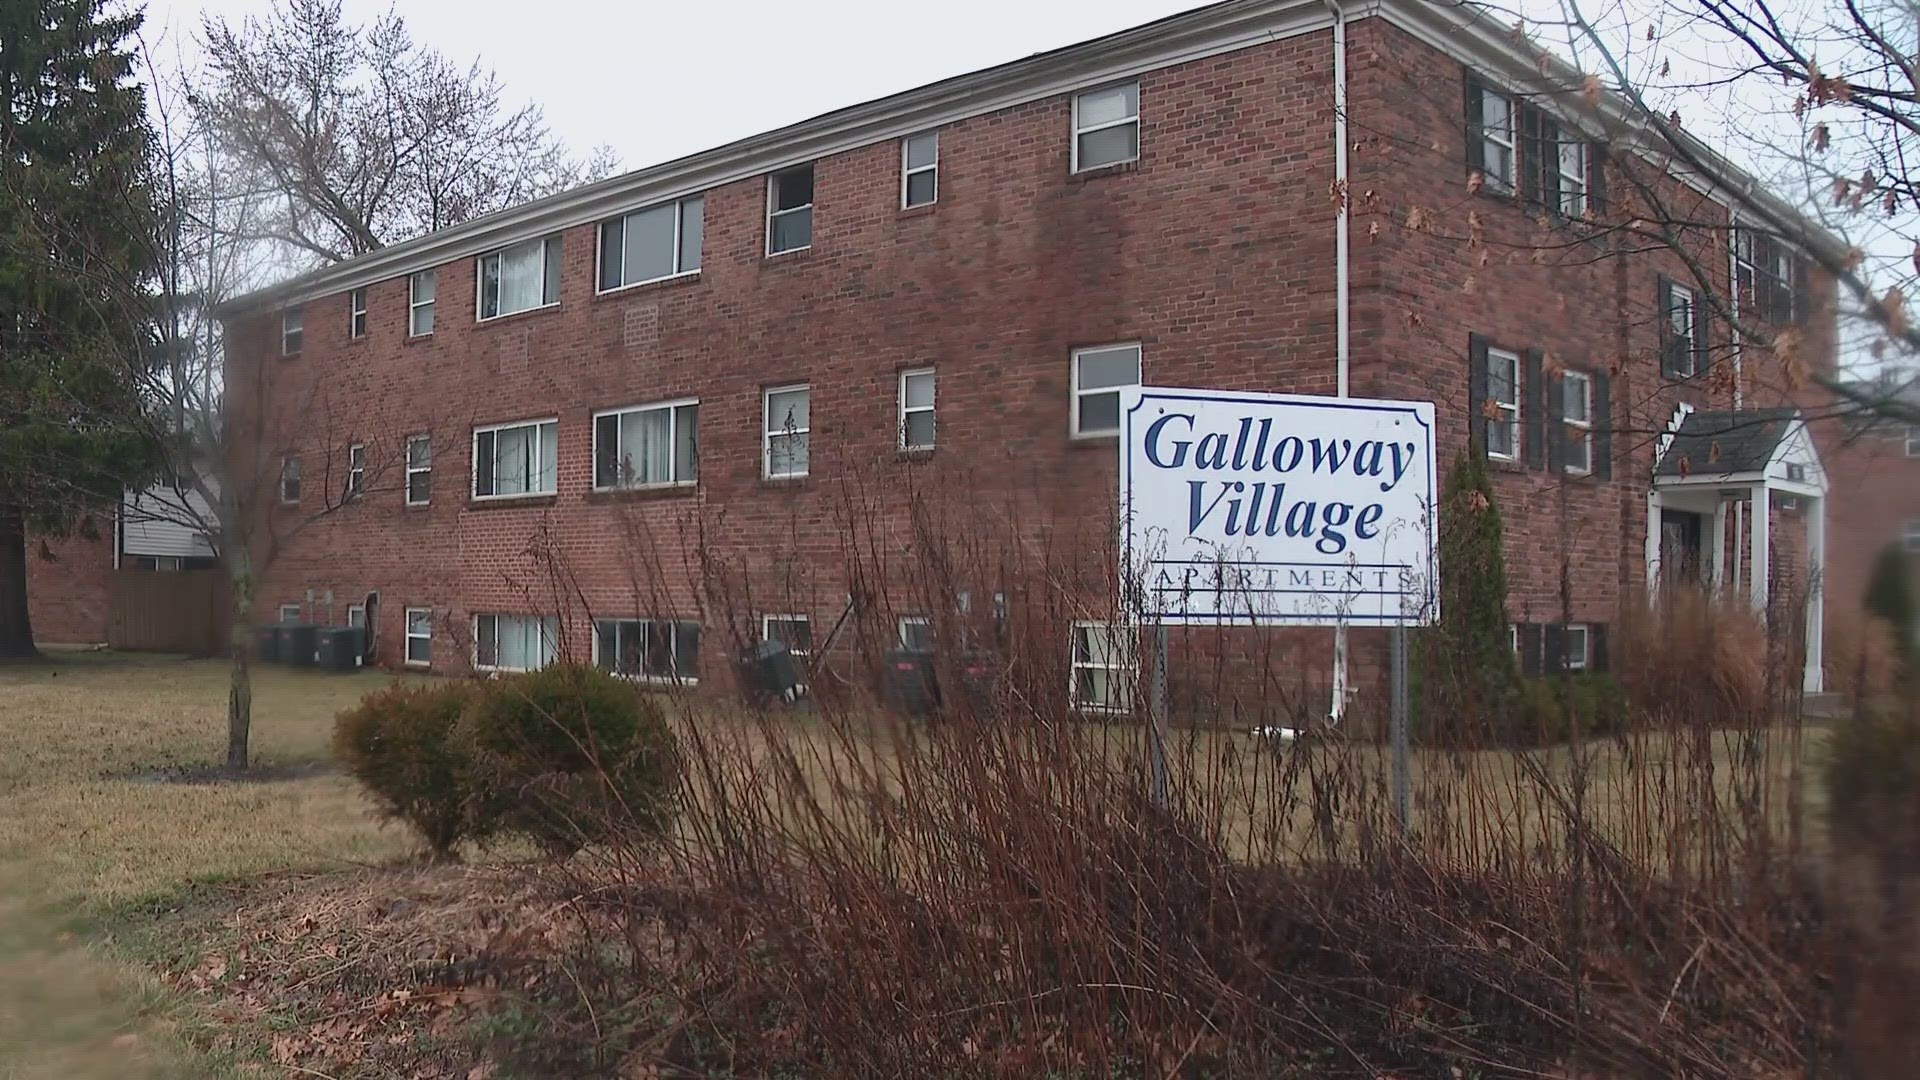 The township’s board of trustees voted unanimously to evict all tenants by March 18 after the apartment complexes were determined to be uninhabitable.